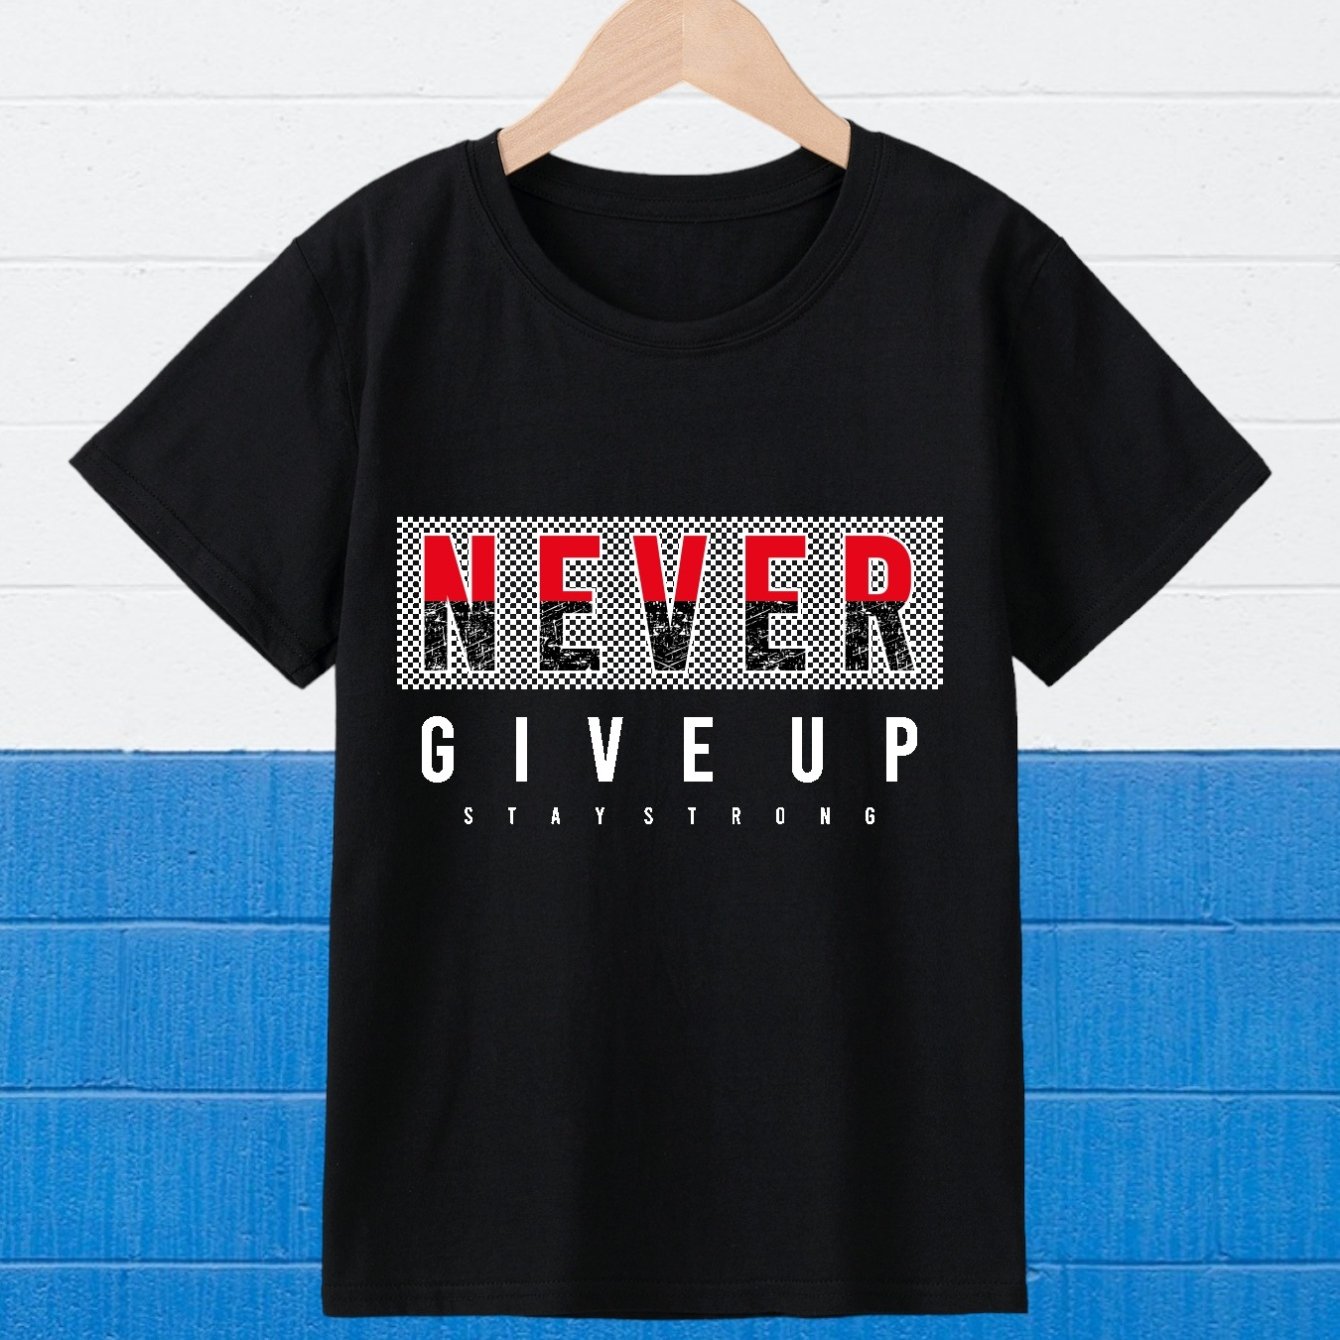 NEVER GIVE UP Youth Christian T-shirt claimedbygoddesigns